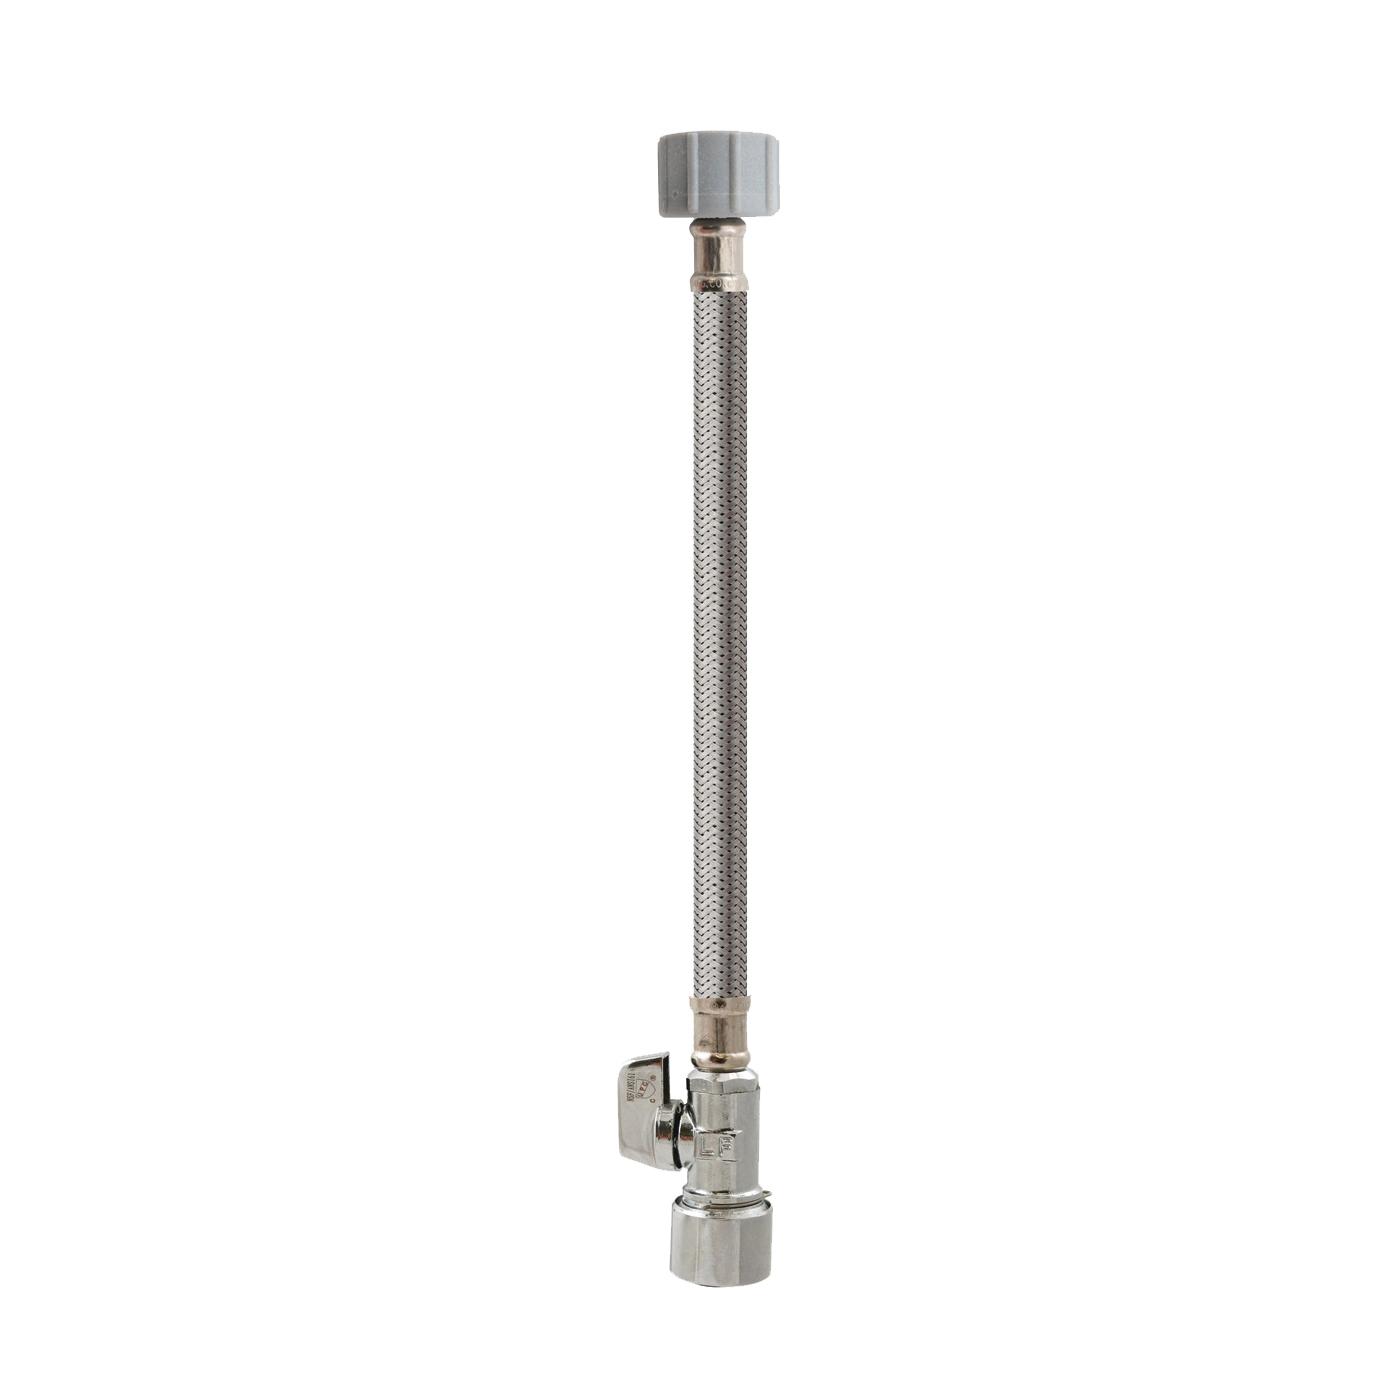 Keeney 2068PCPOLFC12K Quick Lock Valve, 5/8 in Connection, Compression, 125 psi Pressure, Stainless Steel Body